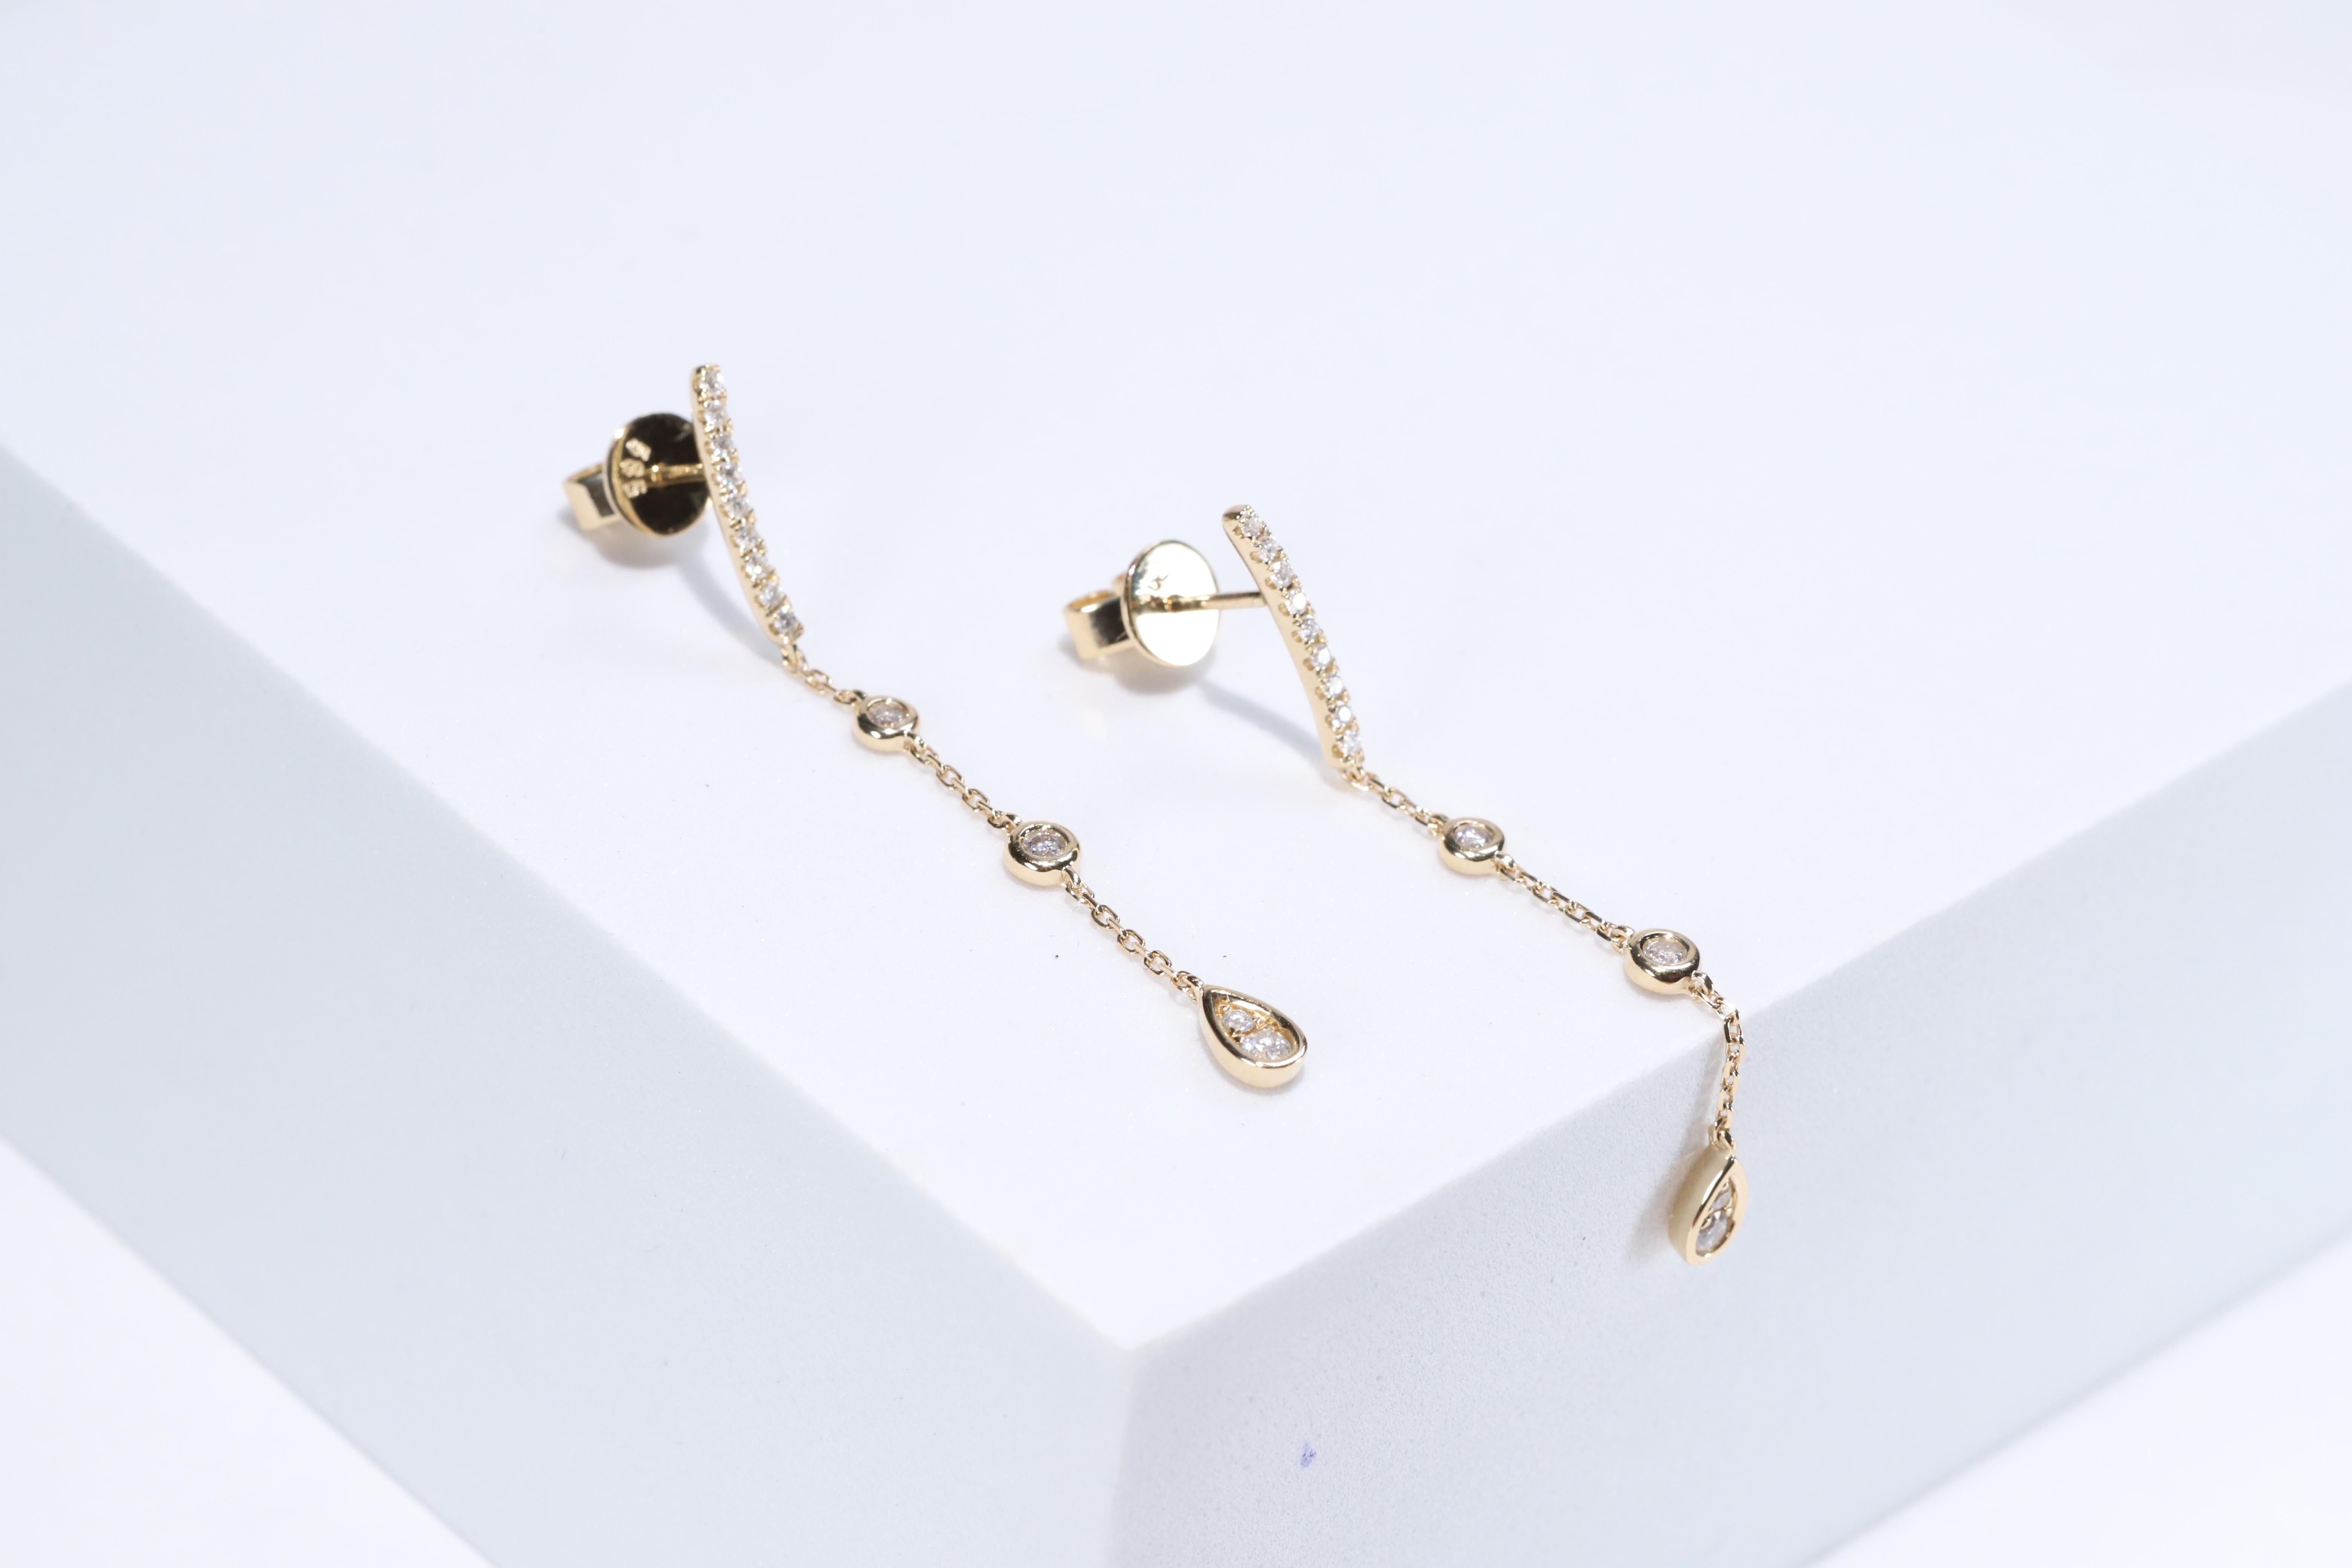 Each of these pretty earrings from Gin & Grace features a with white diamonds. These earrings are made of rich 14-karat Yellow gold with a high polish. Style: Dangle, Diamonds: 26 pcs Diamond cut: Round Diamond weight: 0.29 carat Color: G-H Clarity: